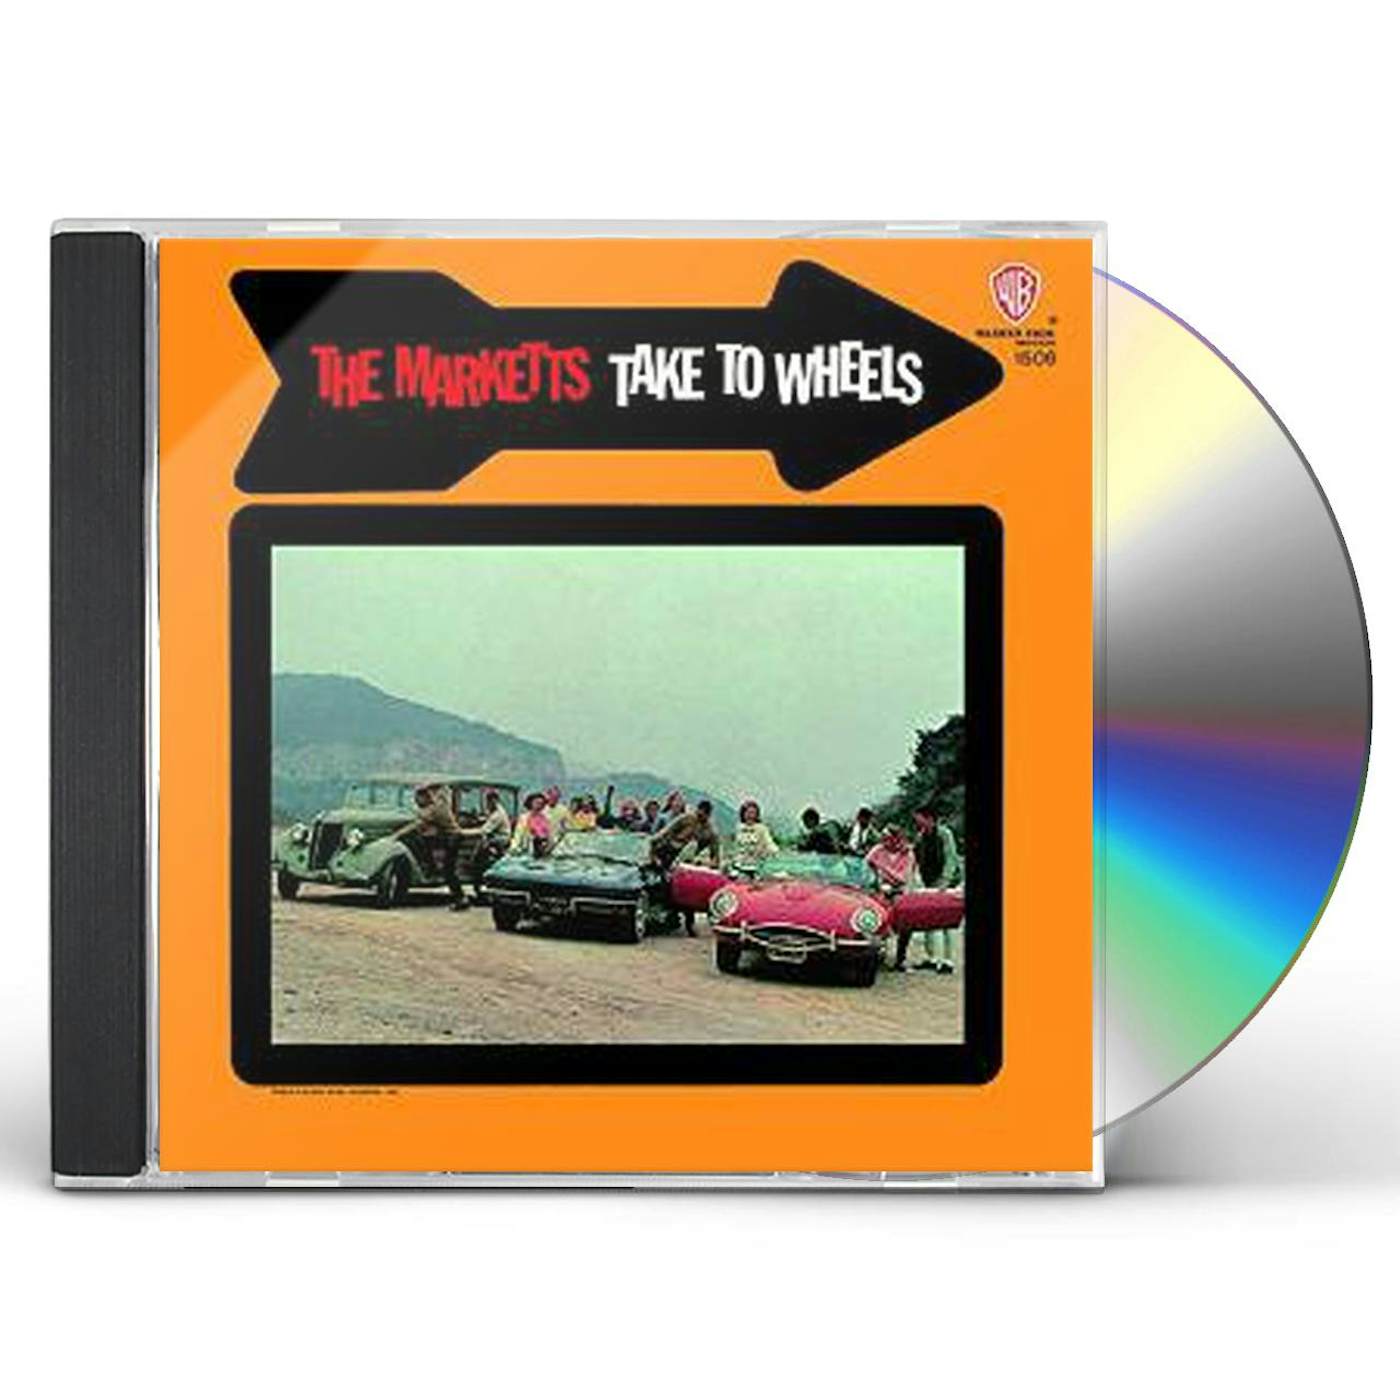 The Marketts TAKE TO WHEELS CD